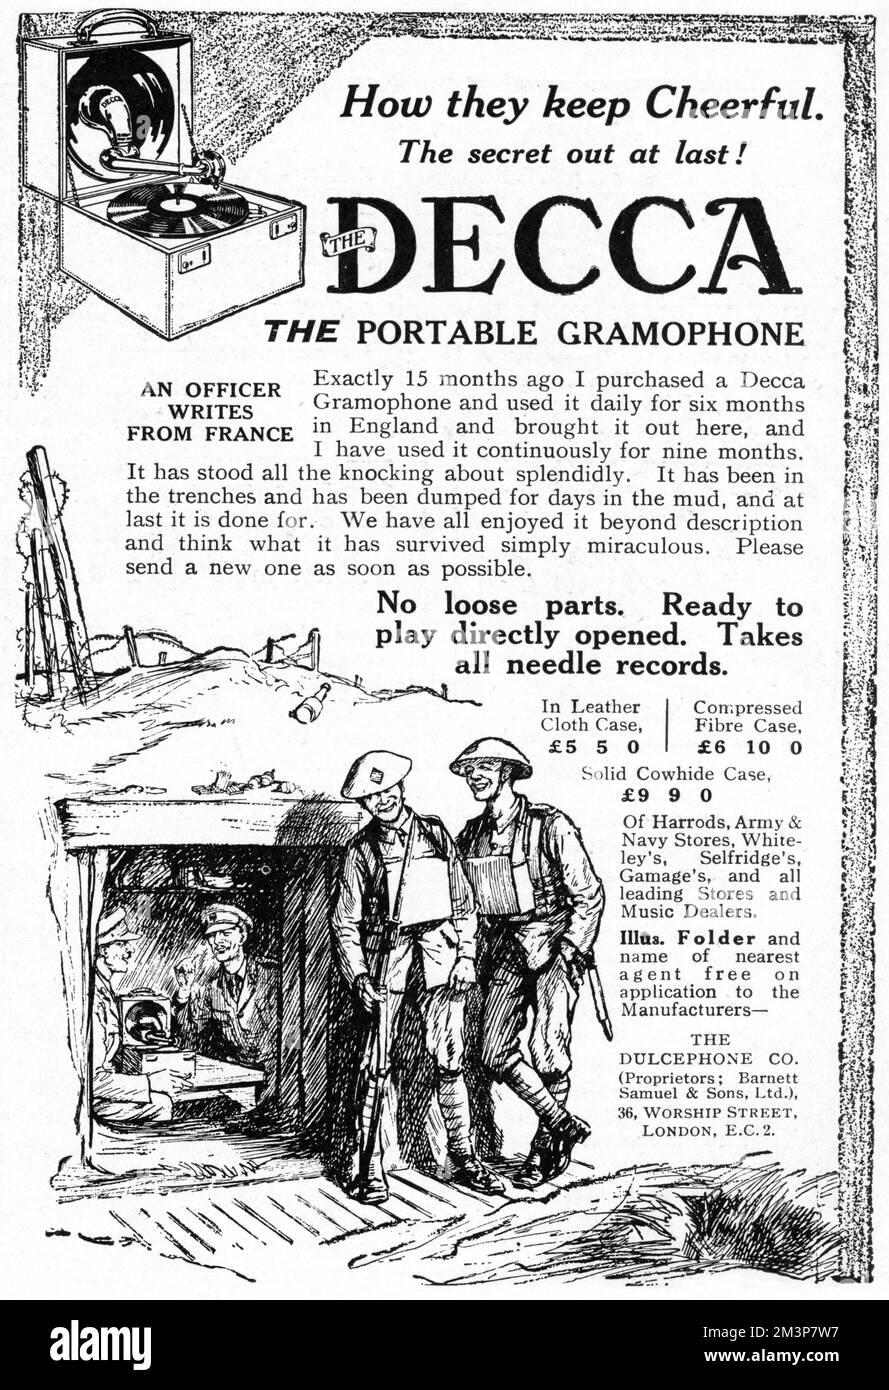 An advertisement for the Decca portable gramophone, with no loose parts and ready to play directly opened.  The gramophone was recommended for taking to the Front during the First World War and it is suggested here as a way to keep cheerful.  The illustration depicts a couple of soldiers, possibly on sentry duty, standing by the entrance to a dug-out to enjoy the strains of music from the gramophone played by two officers inside.     Date: 1917 Stock Photo